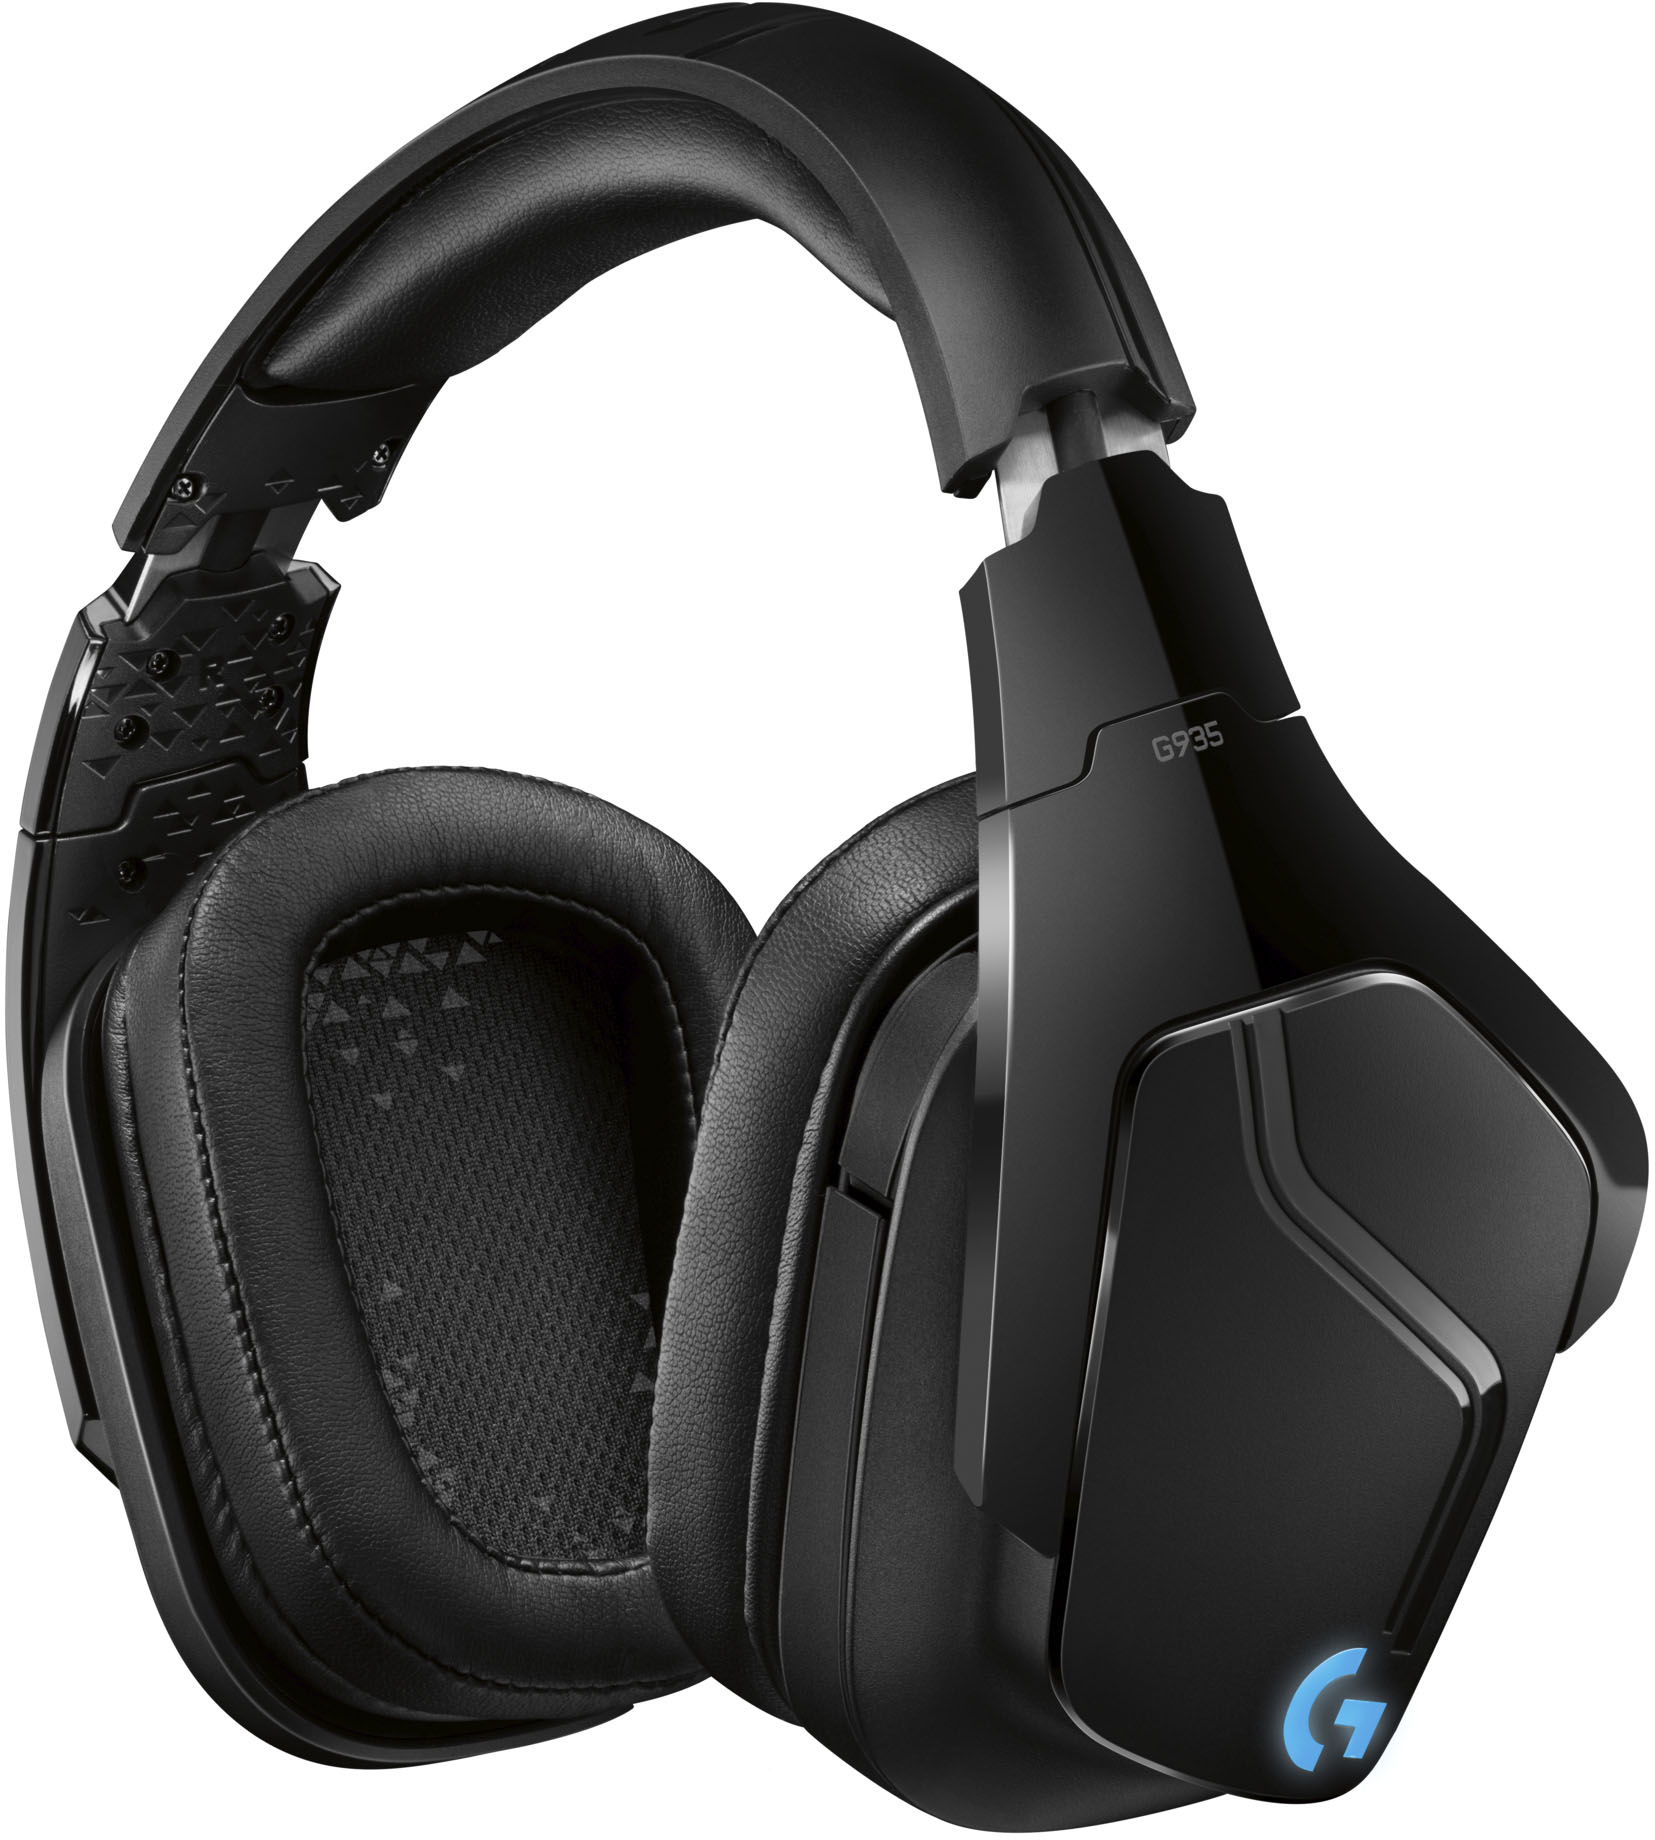 wireless pc gaming headset with mic